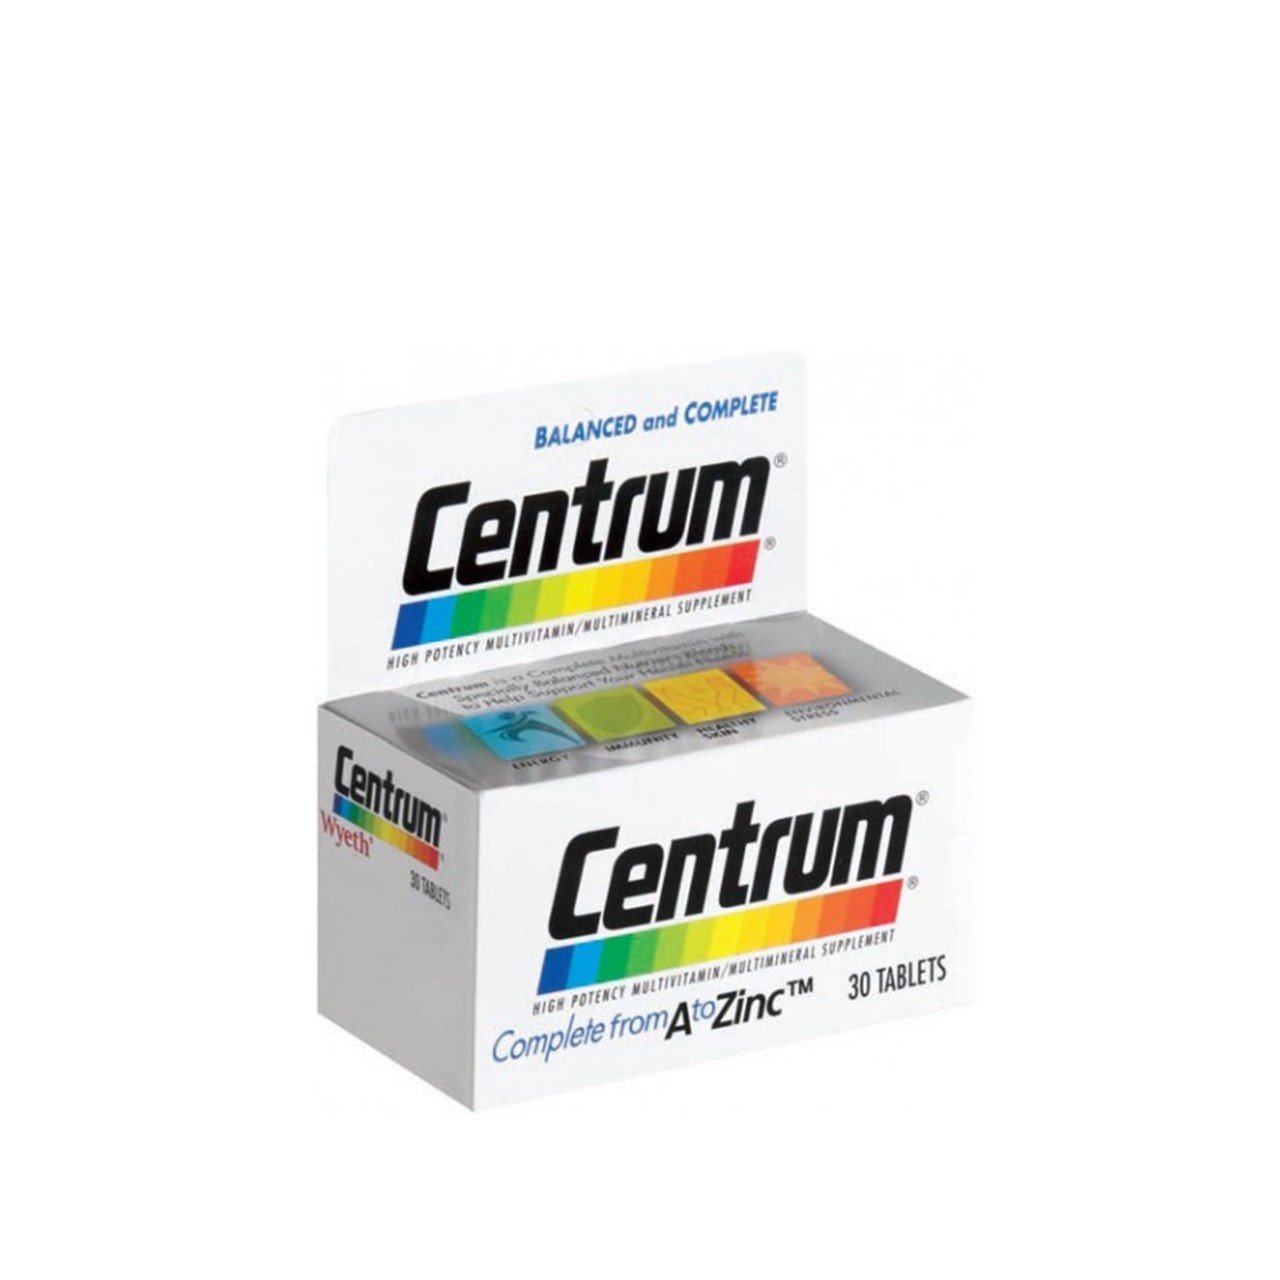 Centrum Multivitamin and Multimineral Complex Supplement Tablets x30